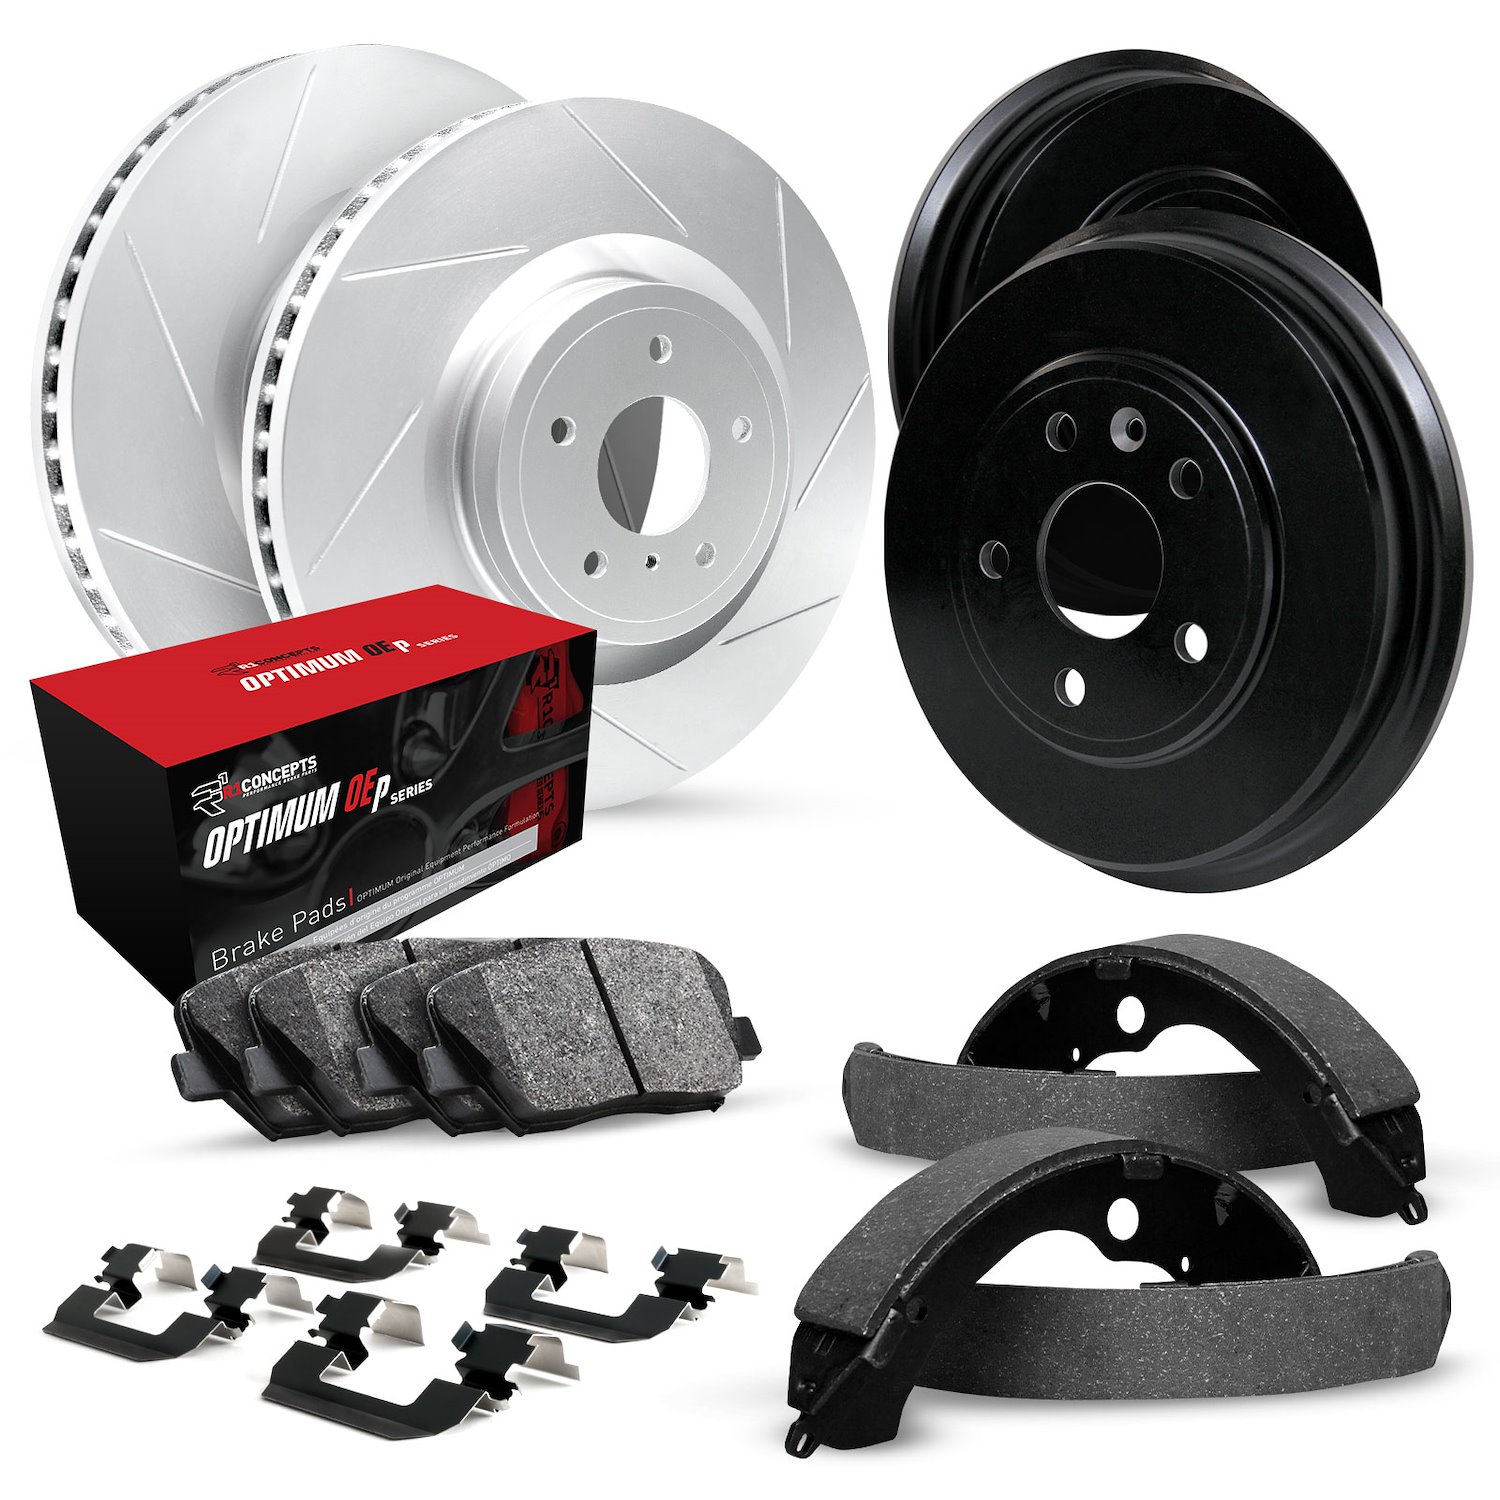 GEO-Carbon Slotted Brake Rotor & Drum Set w/Optimum OE Pads, Shoes, & Hardware, 1972-1975 GM, Position: Front & Rear